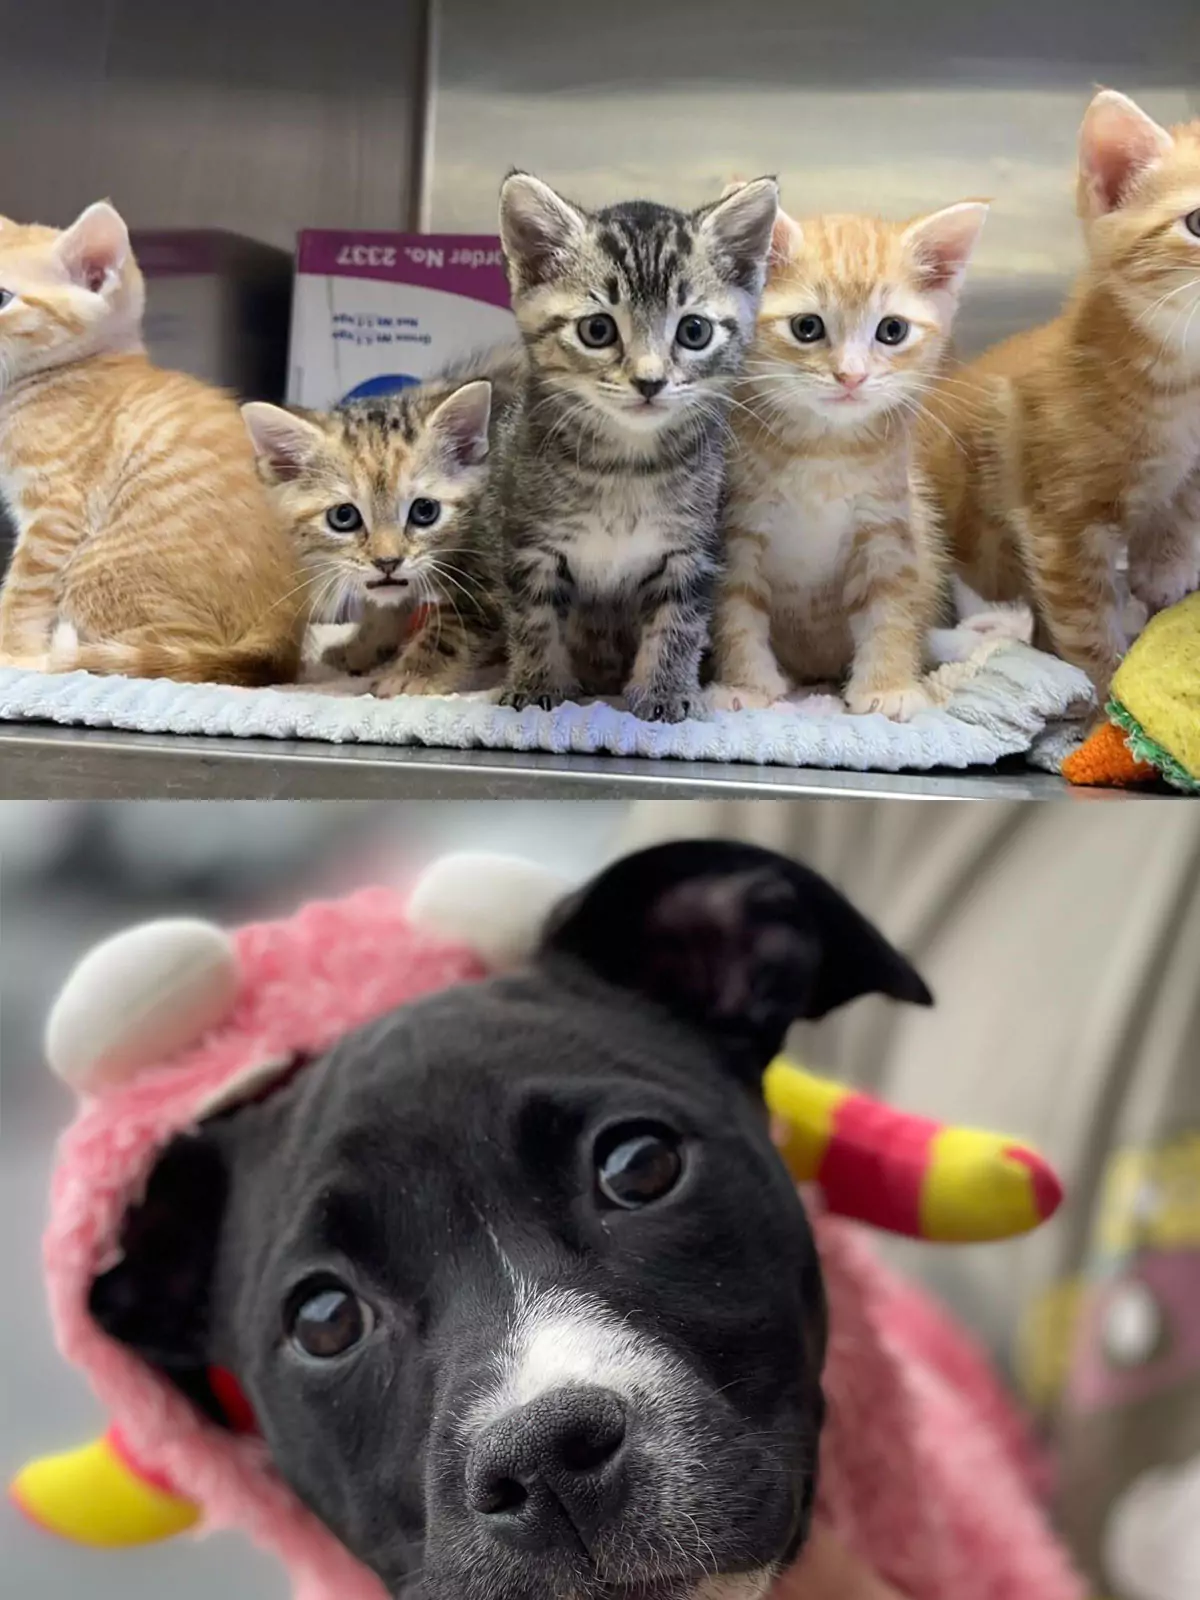 A group of kittens, a dog and a cat.